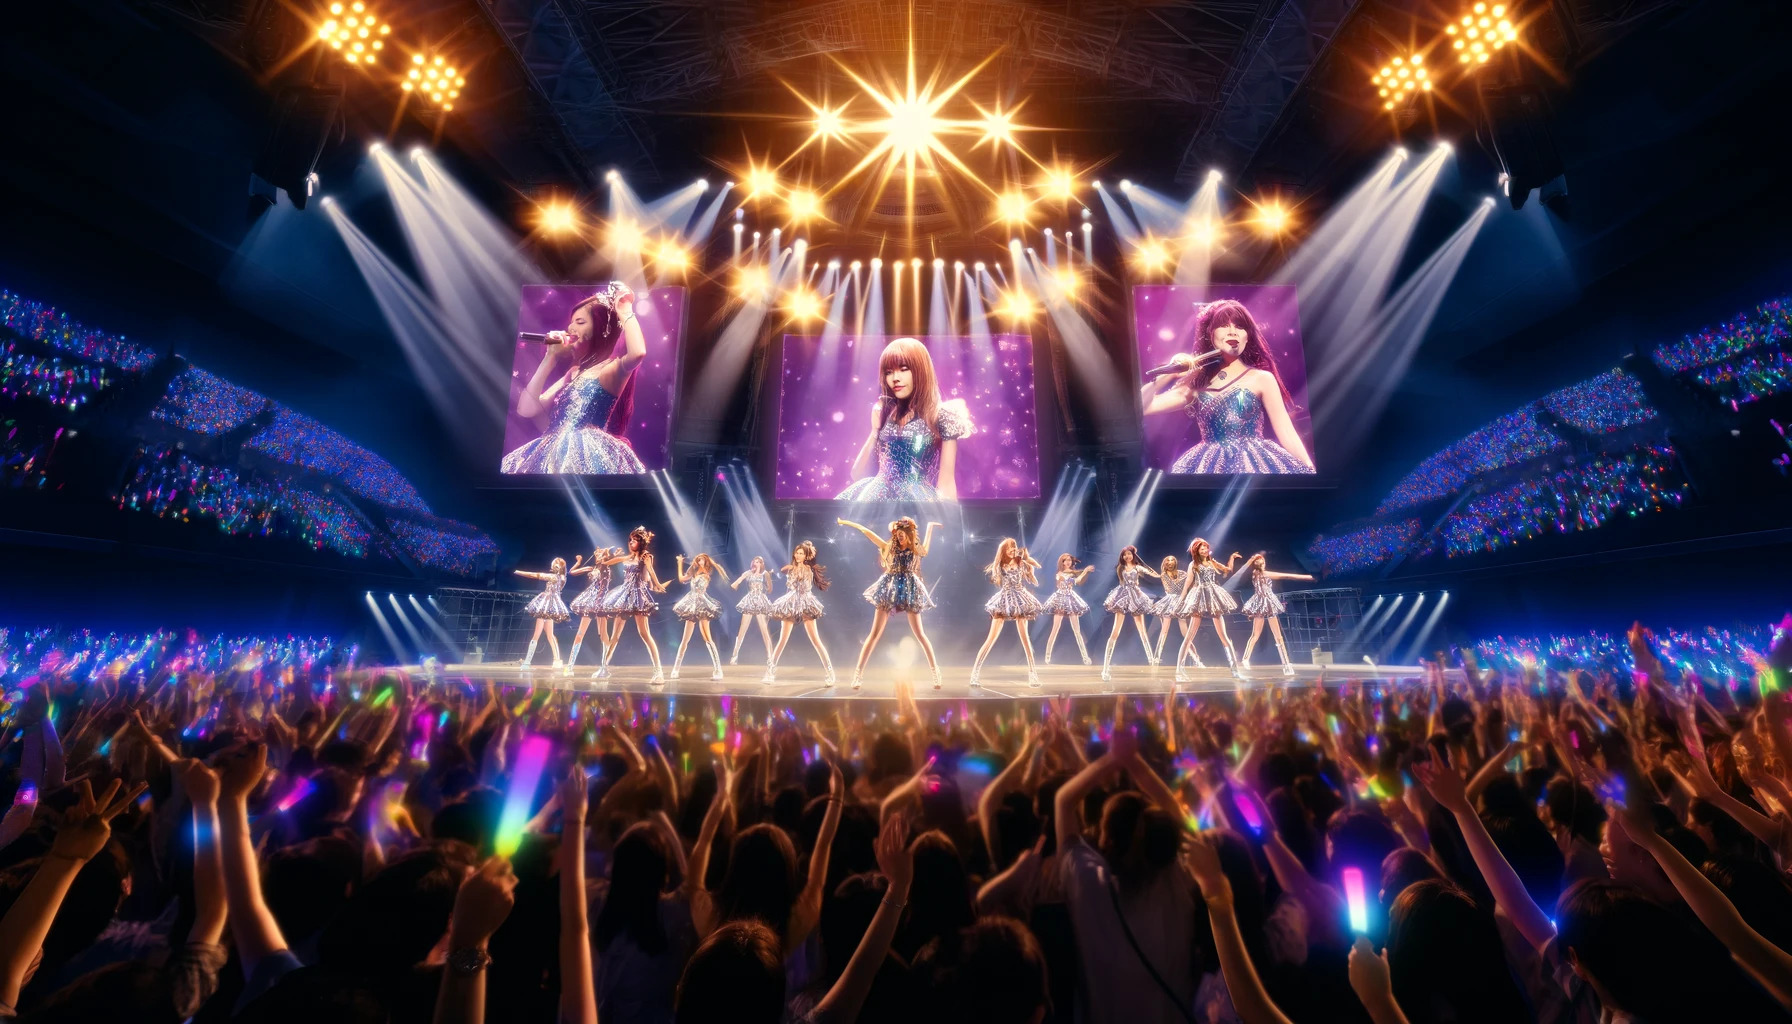 A lively idol concert at the Budokan arena in Tokyo, Japan, featuring a popular female idol group performing. The stage is spectacularly lit with vibrant LED screens, colorful spotlights, and dynamic laser effects. The idol group consists of several young women, dressed in sparkling, coordinated outfits, performing energetic dance routines. The audience, a mix of enthusiastic fans, is waving glow sticks and singing along. The atmosphere is electric with excitement, capturing the special essence of a live idol concert. The image is in a wide 16:9 format.